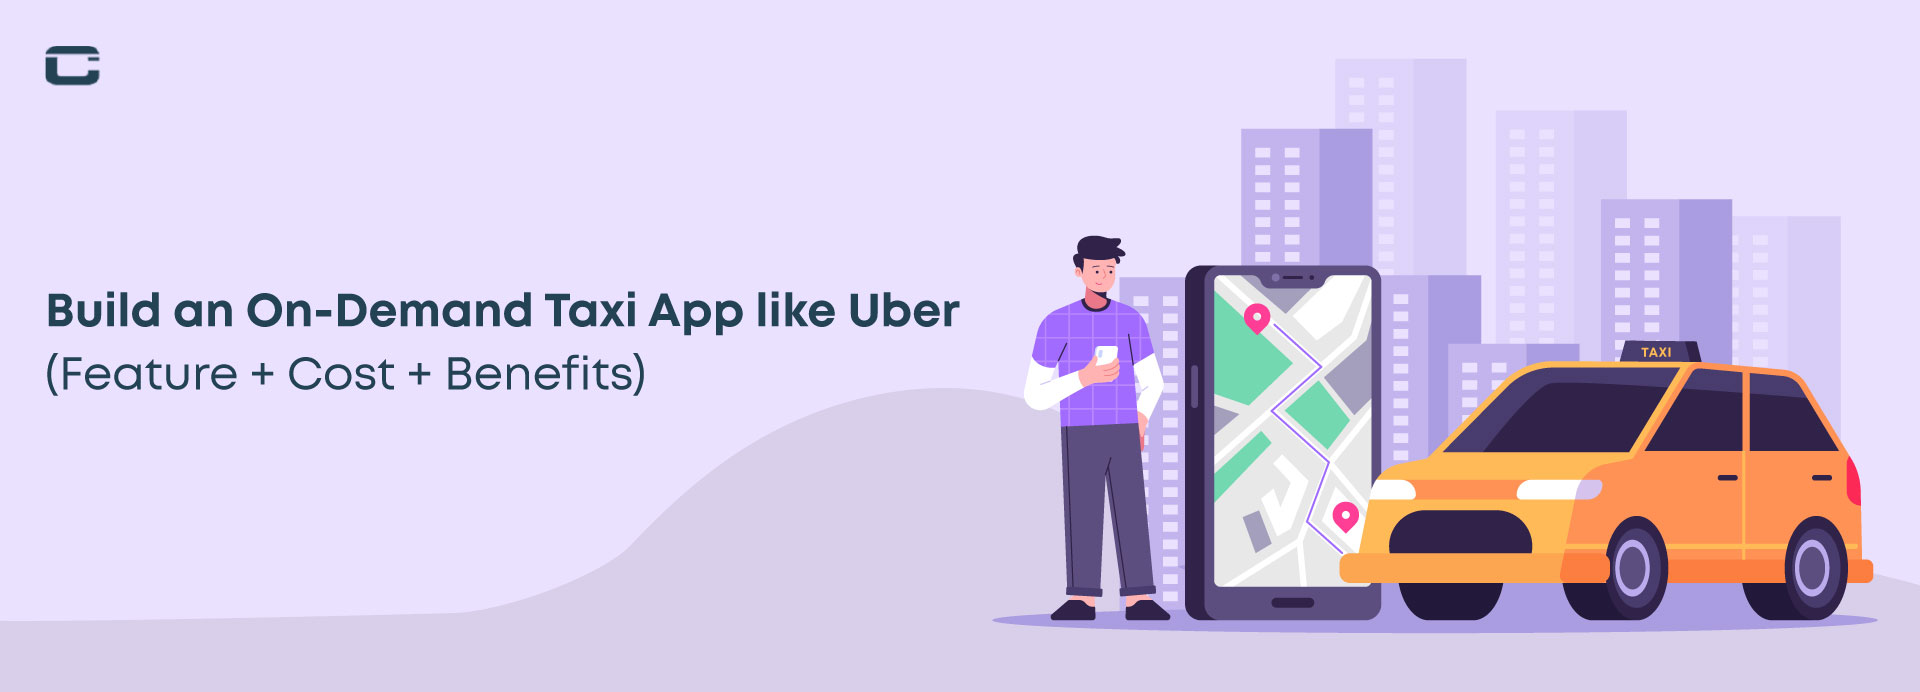 Build an On-Demand Taxi App like Uber (Feature + Cost + Benefits)